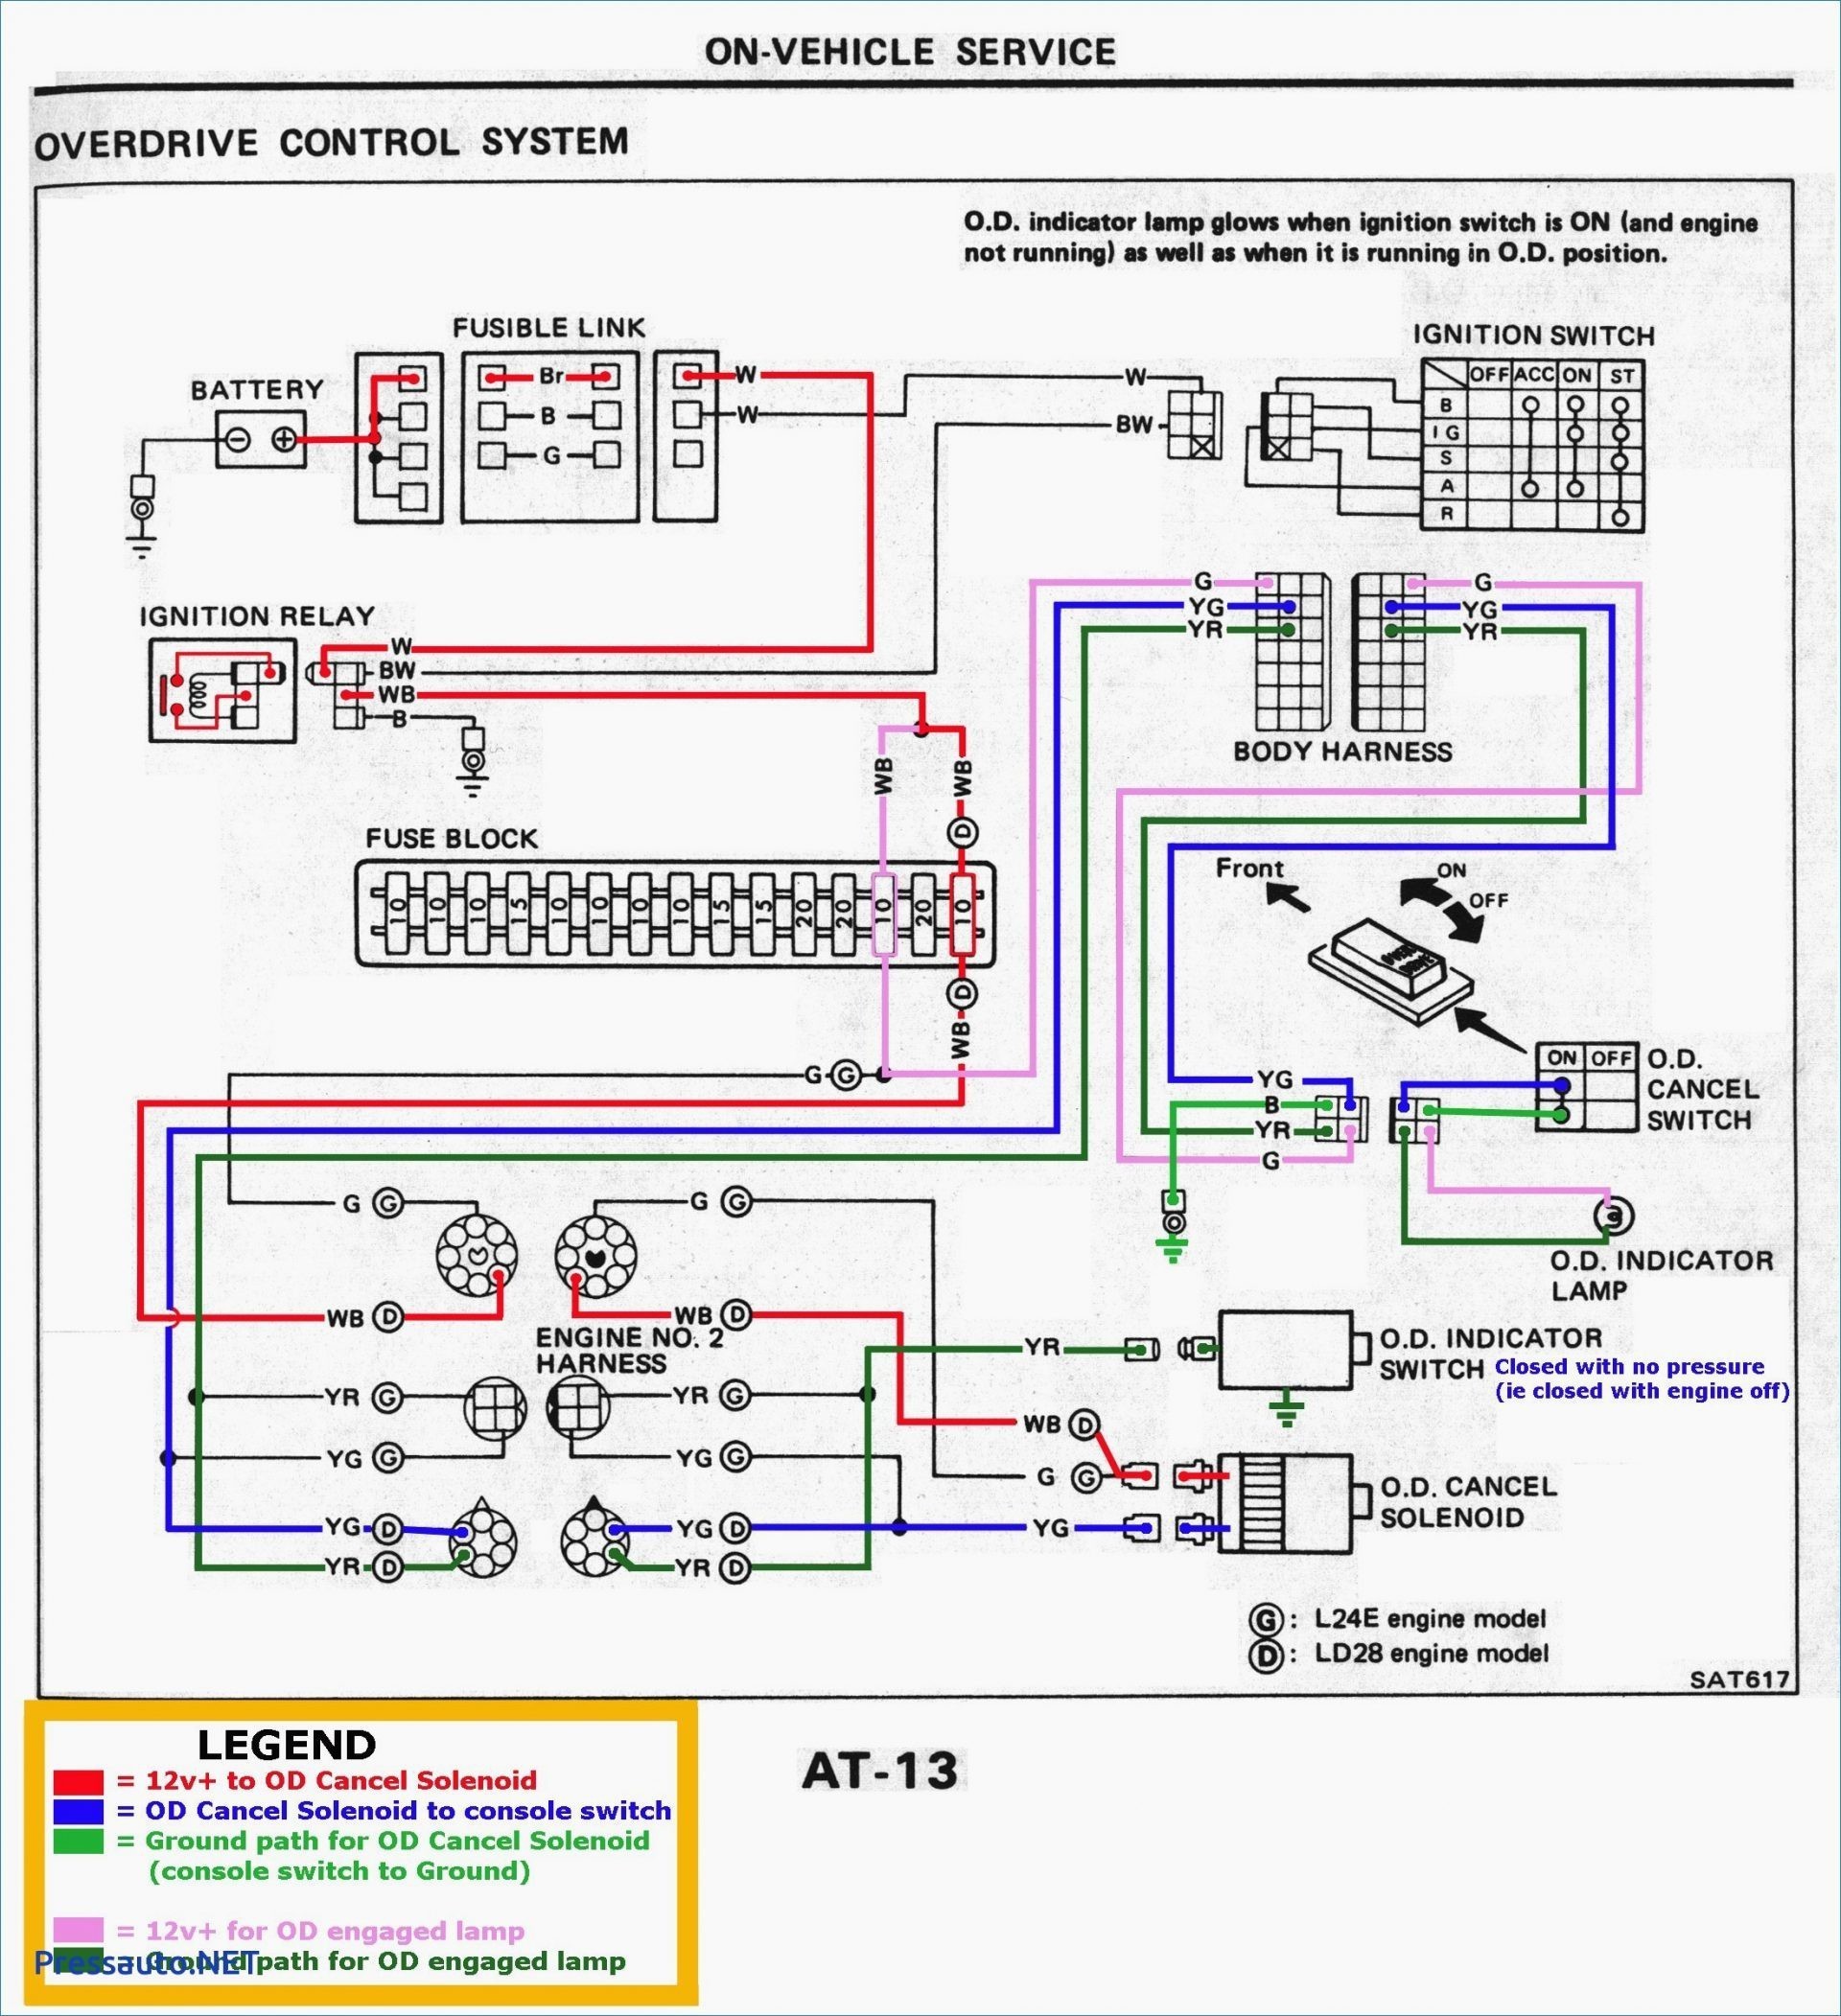 2000 S10 Taillight Wiring Diagram] 1994 ford F 350 Wiring Diagram Tail Lights Also Of 2000 S10 Taillight Wiring